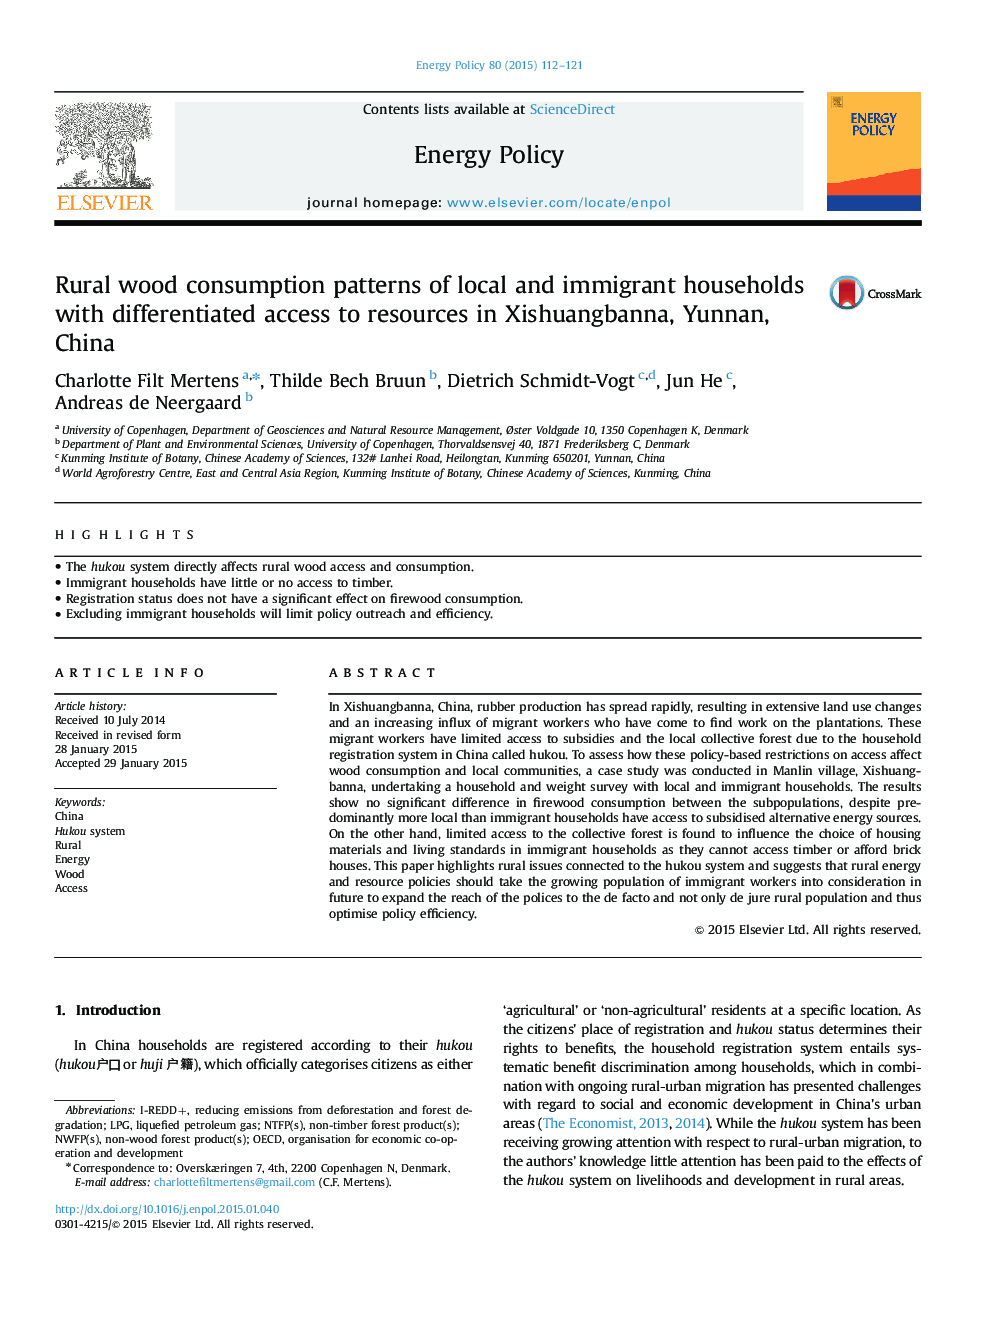 Rural wood consumption patterns of local and immigrant households with differentiated access to resources in Xishuangbanna, Yunnan, China